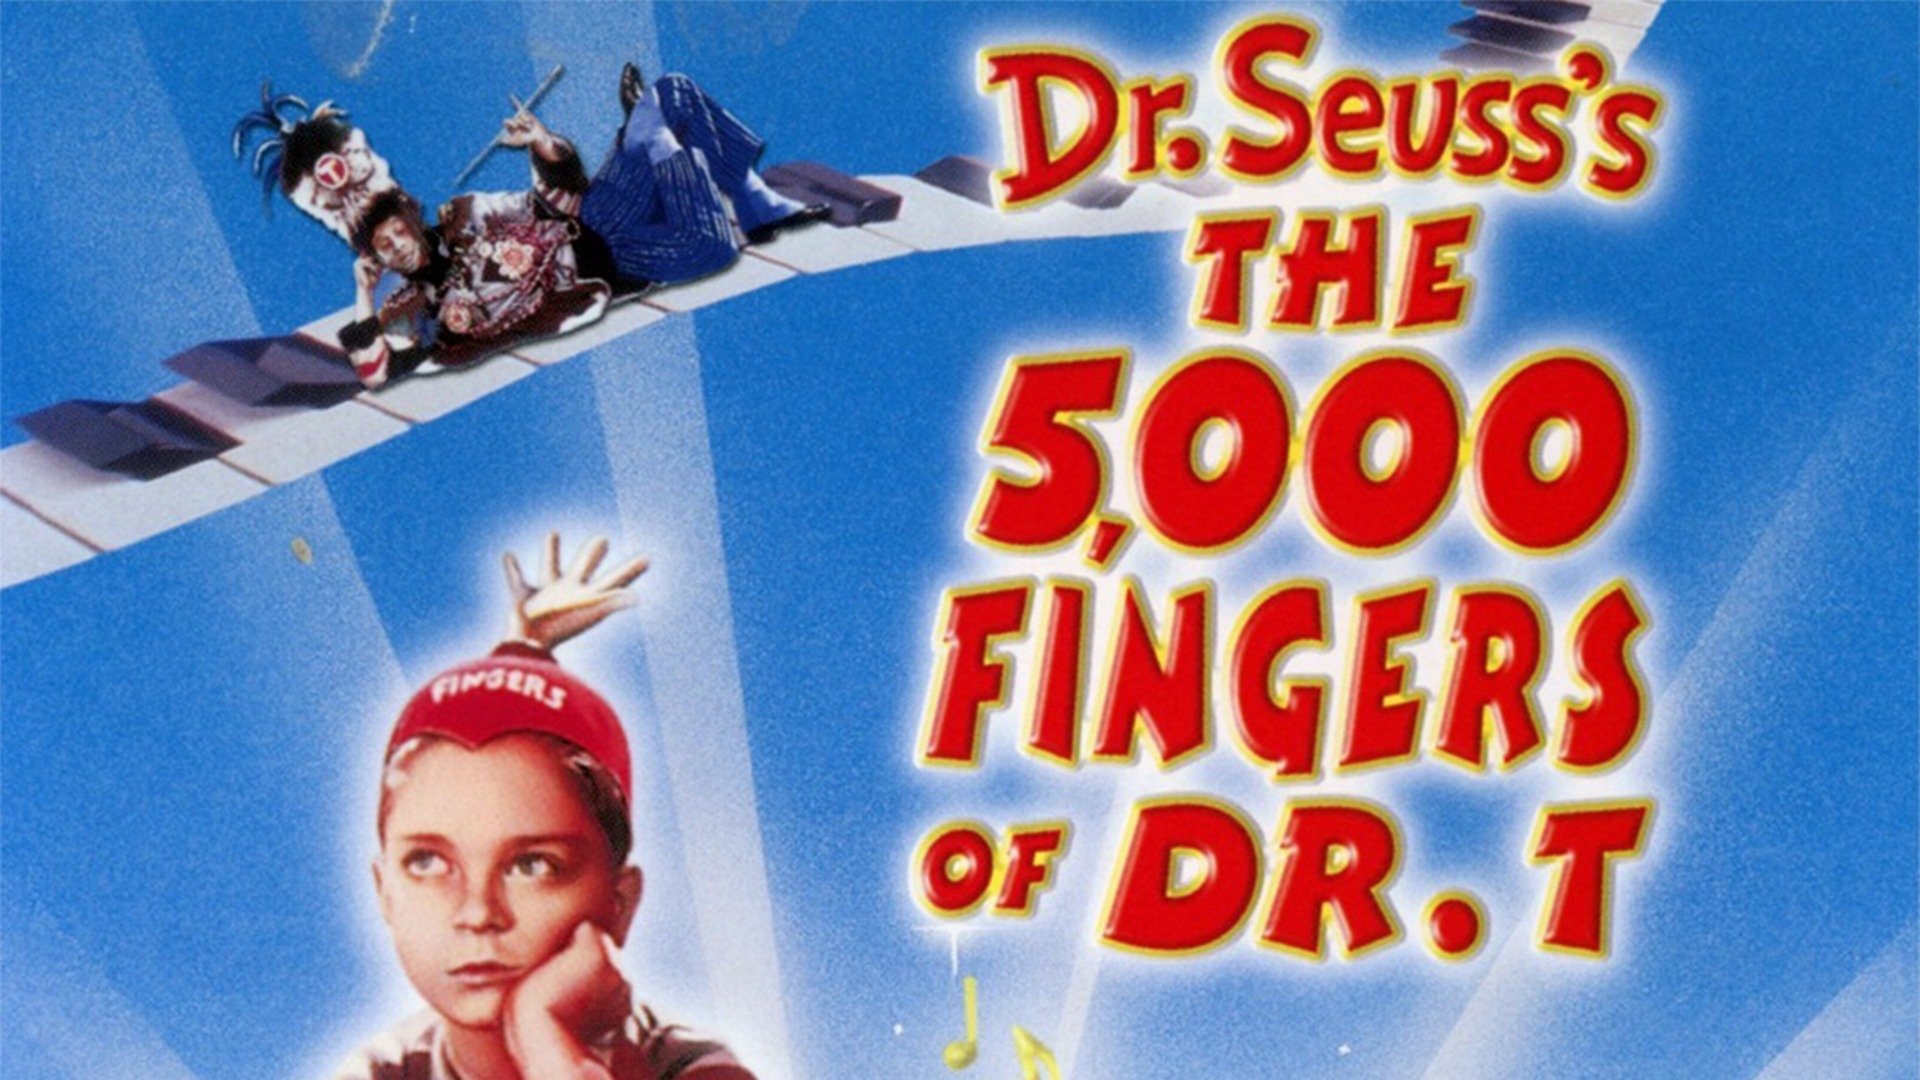 5,000 Fingers Of Dr.t. ,the